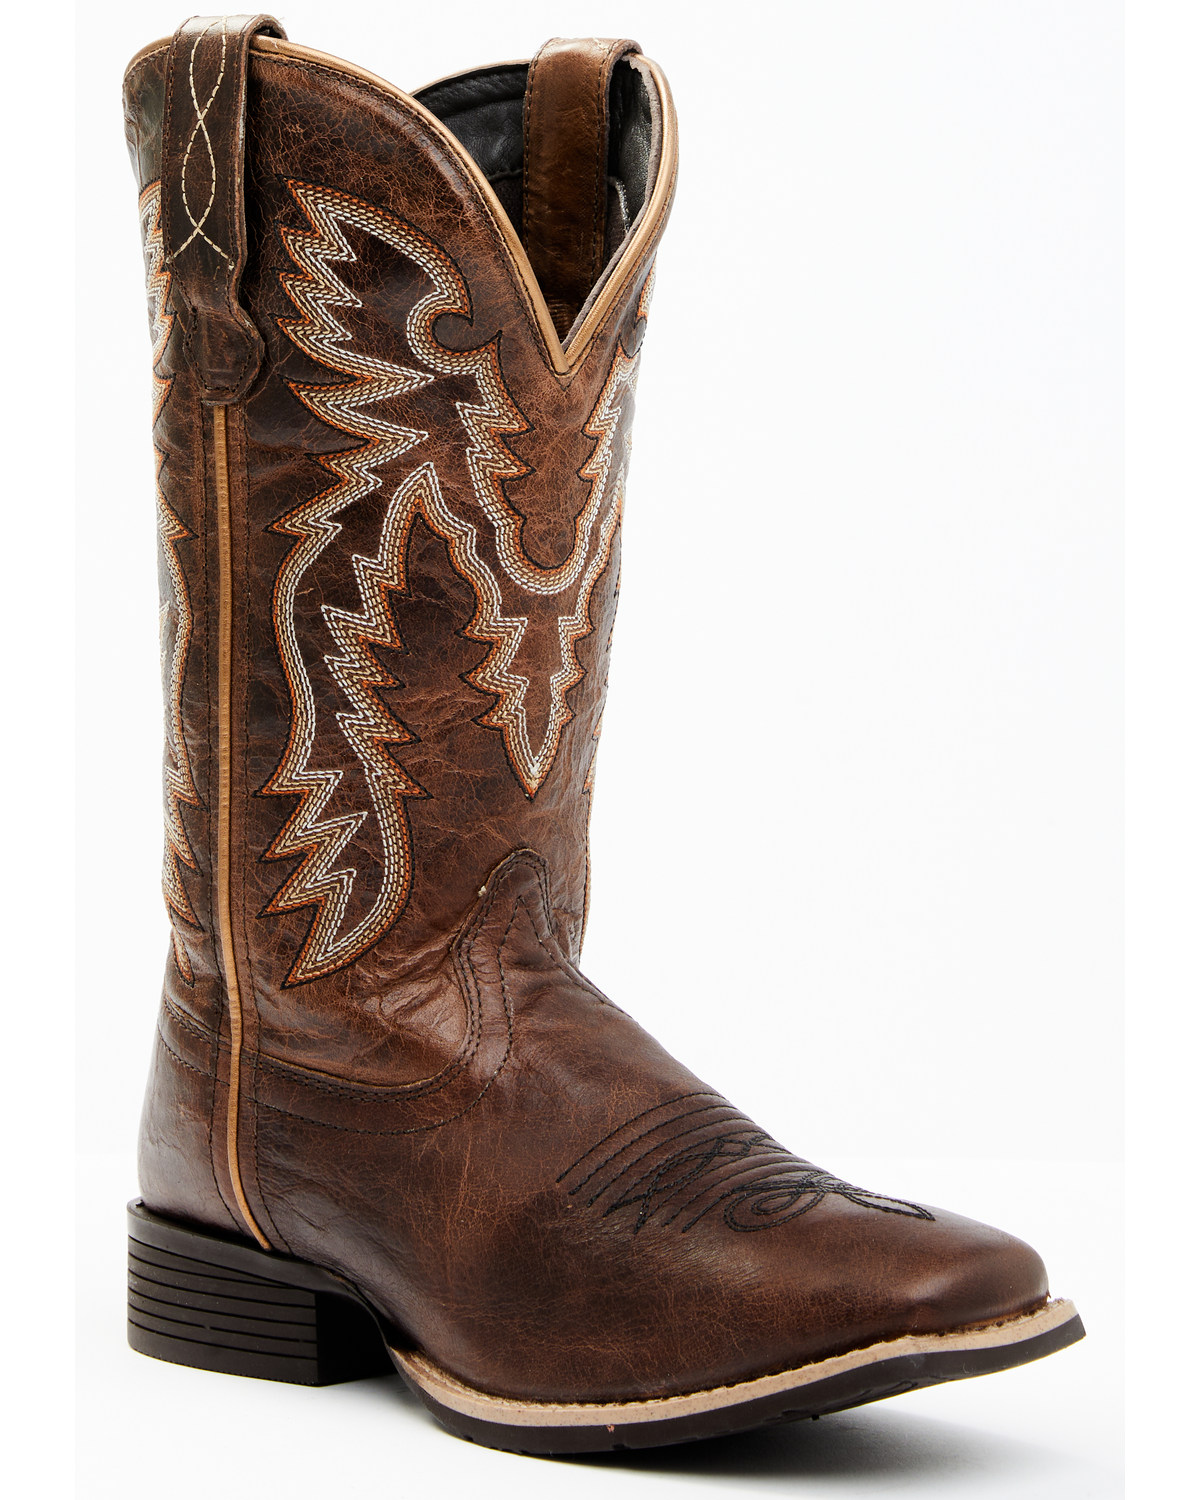 Myra Bag Women's Salvage Oesle Western Boots - Broad Square Toe